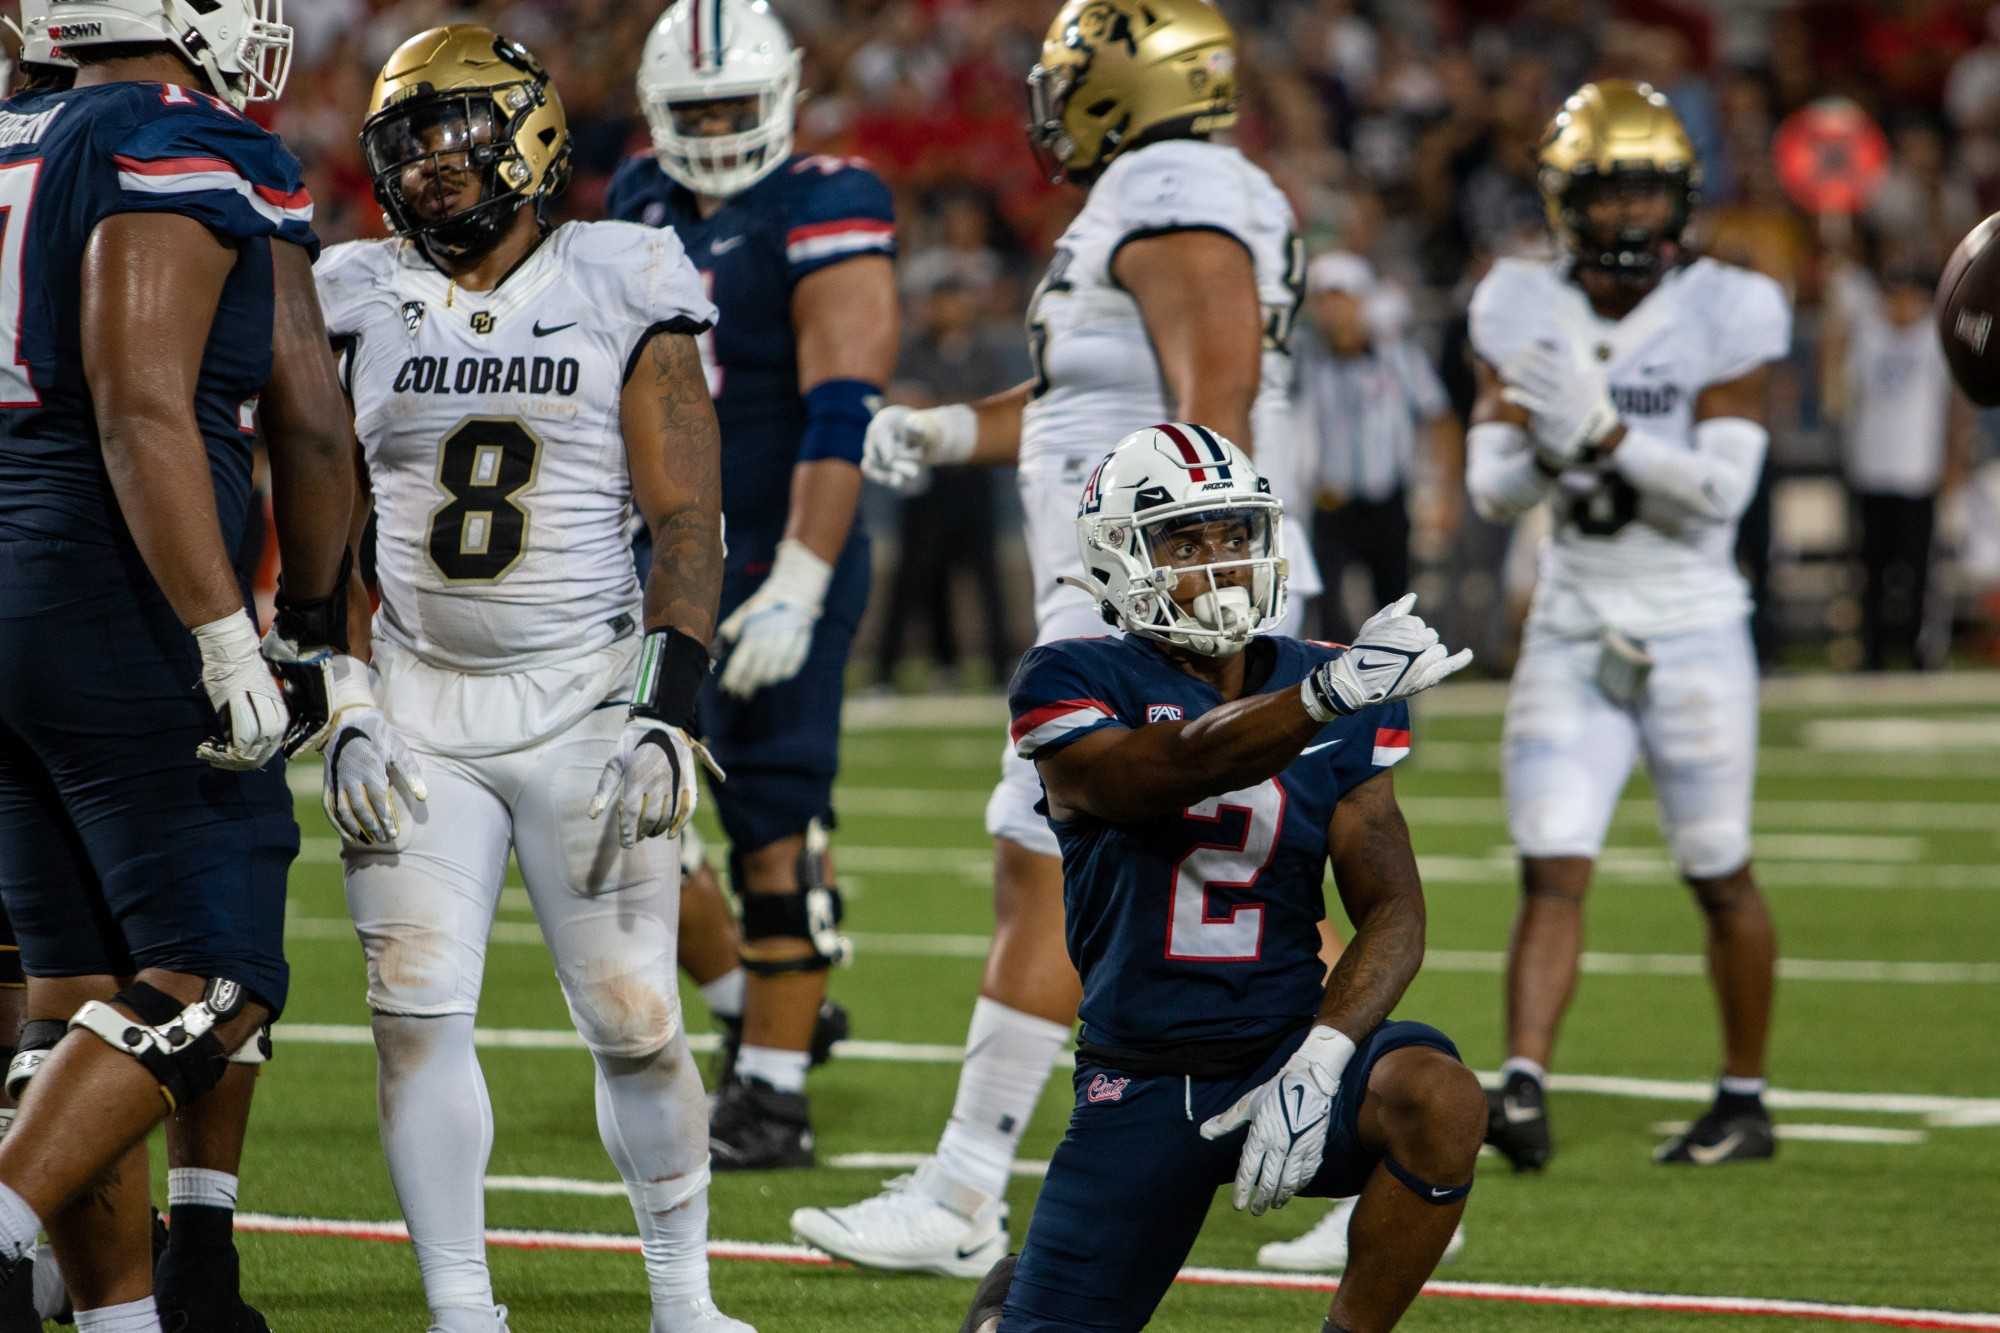 Jacob Cowing, a wide receiver on the Arizona football team, tosses the ball to a referee after a play at the game against the University of Colorado Boulder on Saturday, Oct. 1, at Arizona Stadium. The Wildcats would go on to win the game 43-20 and advance their record to 3-2.